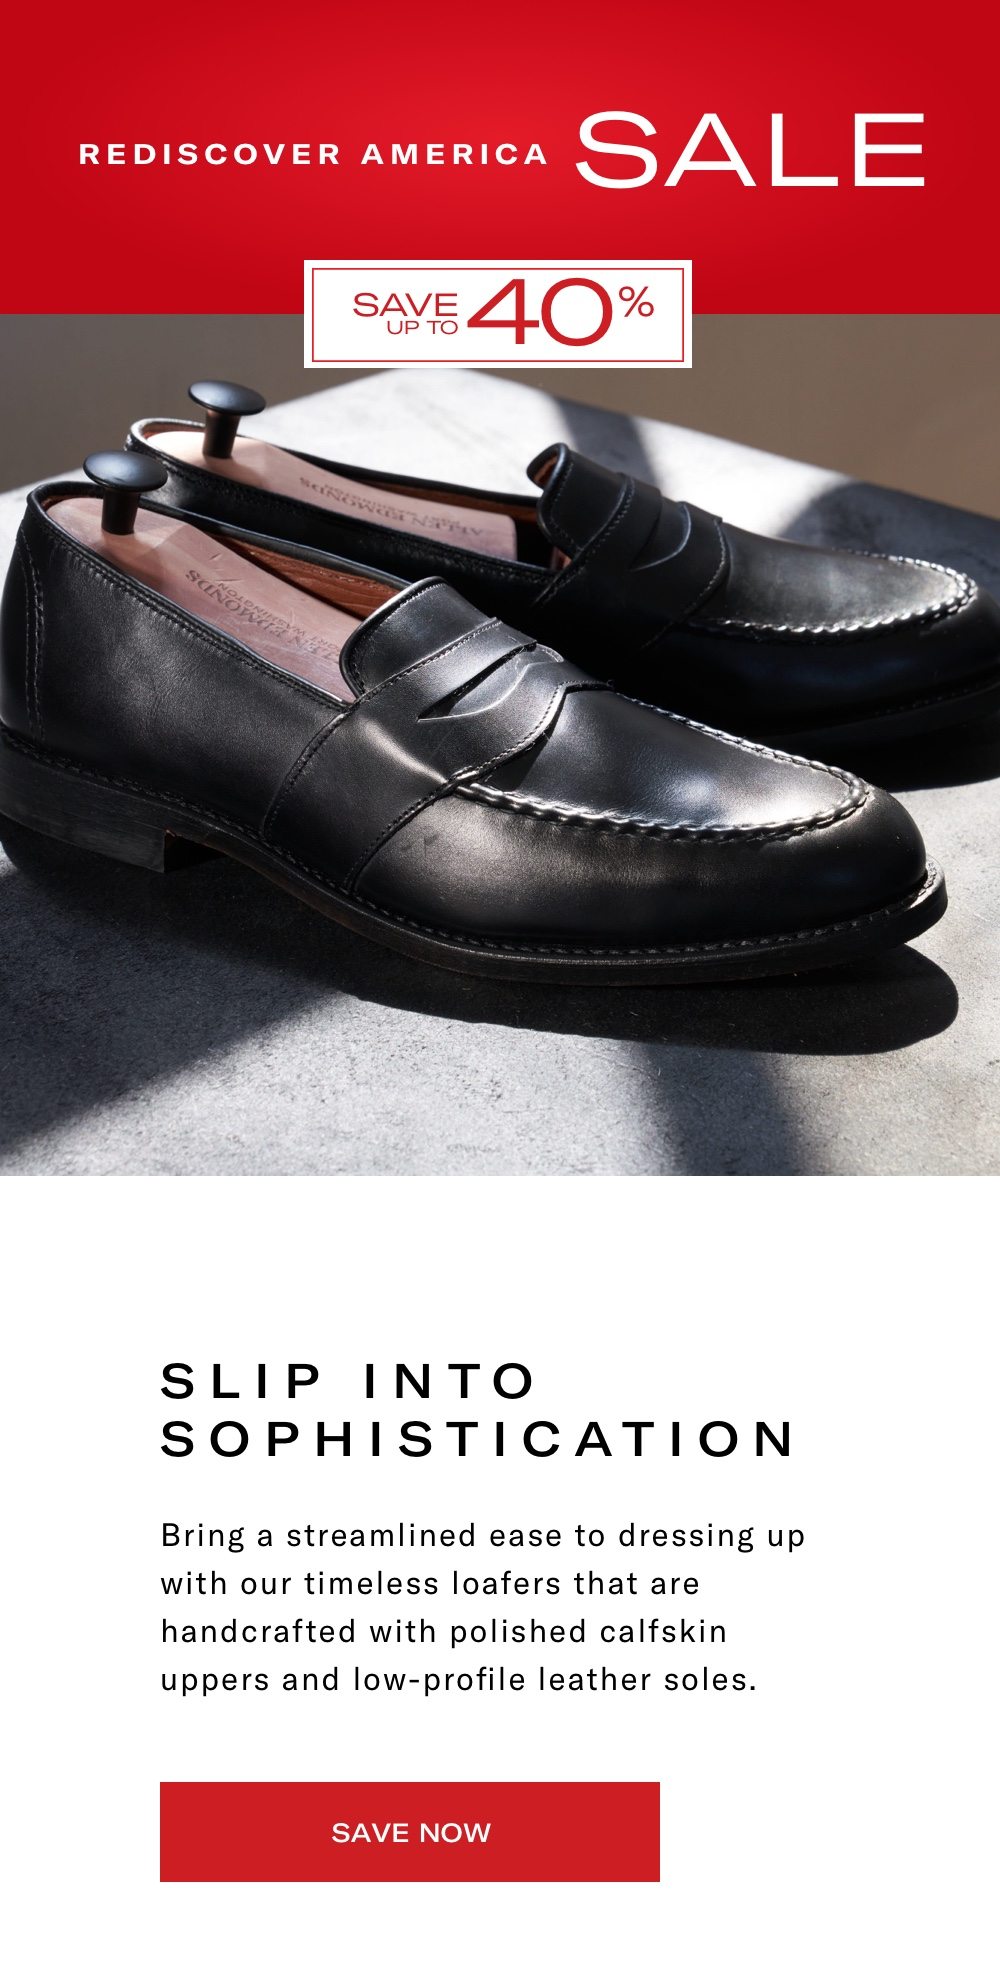 Save on Slip-Ons Now